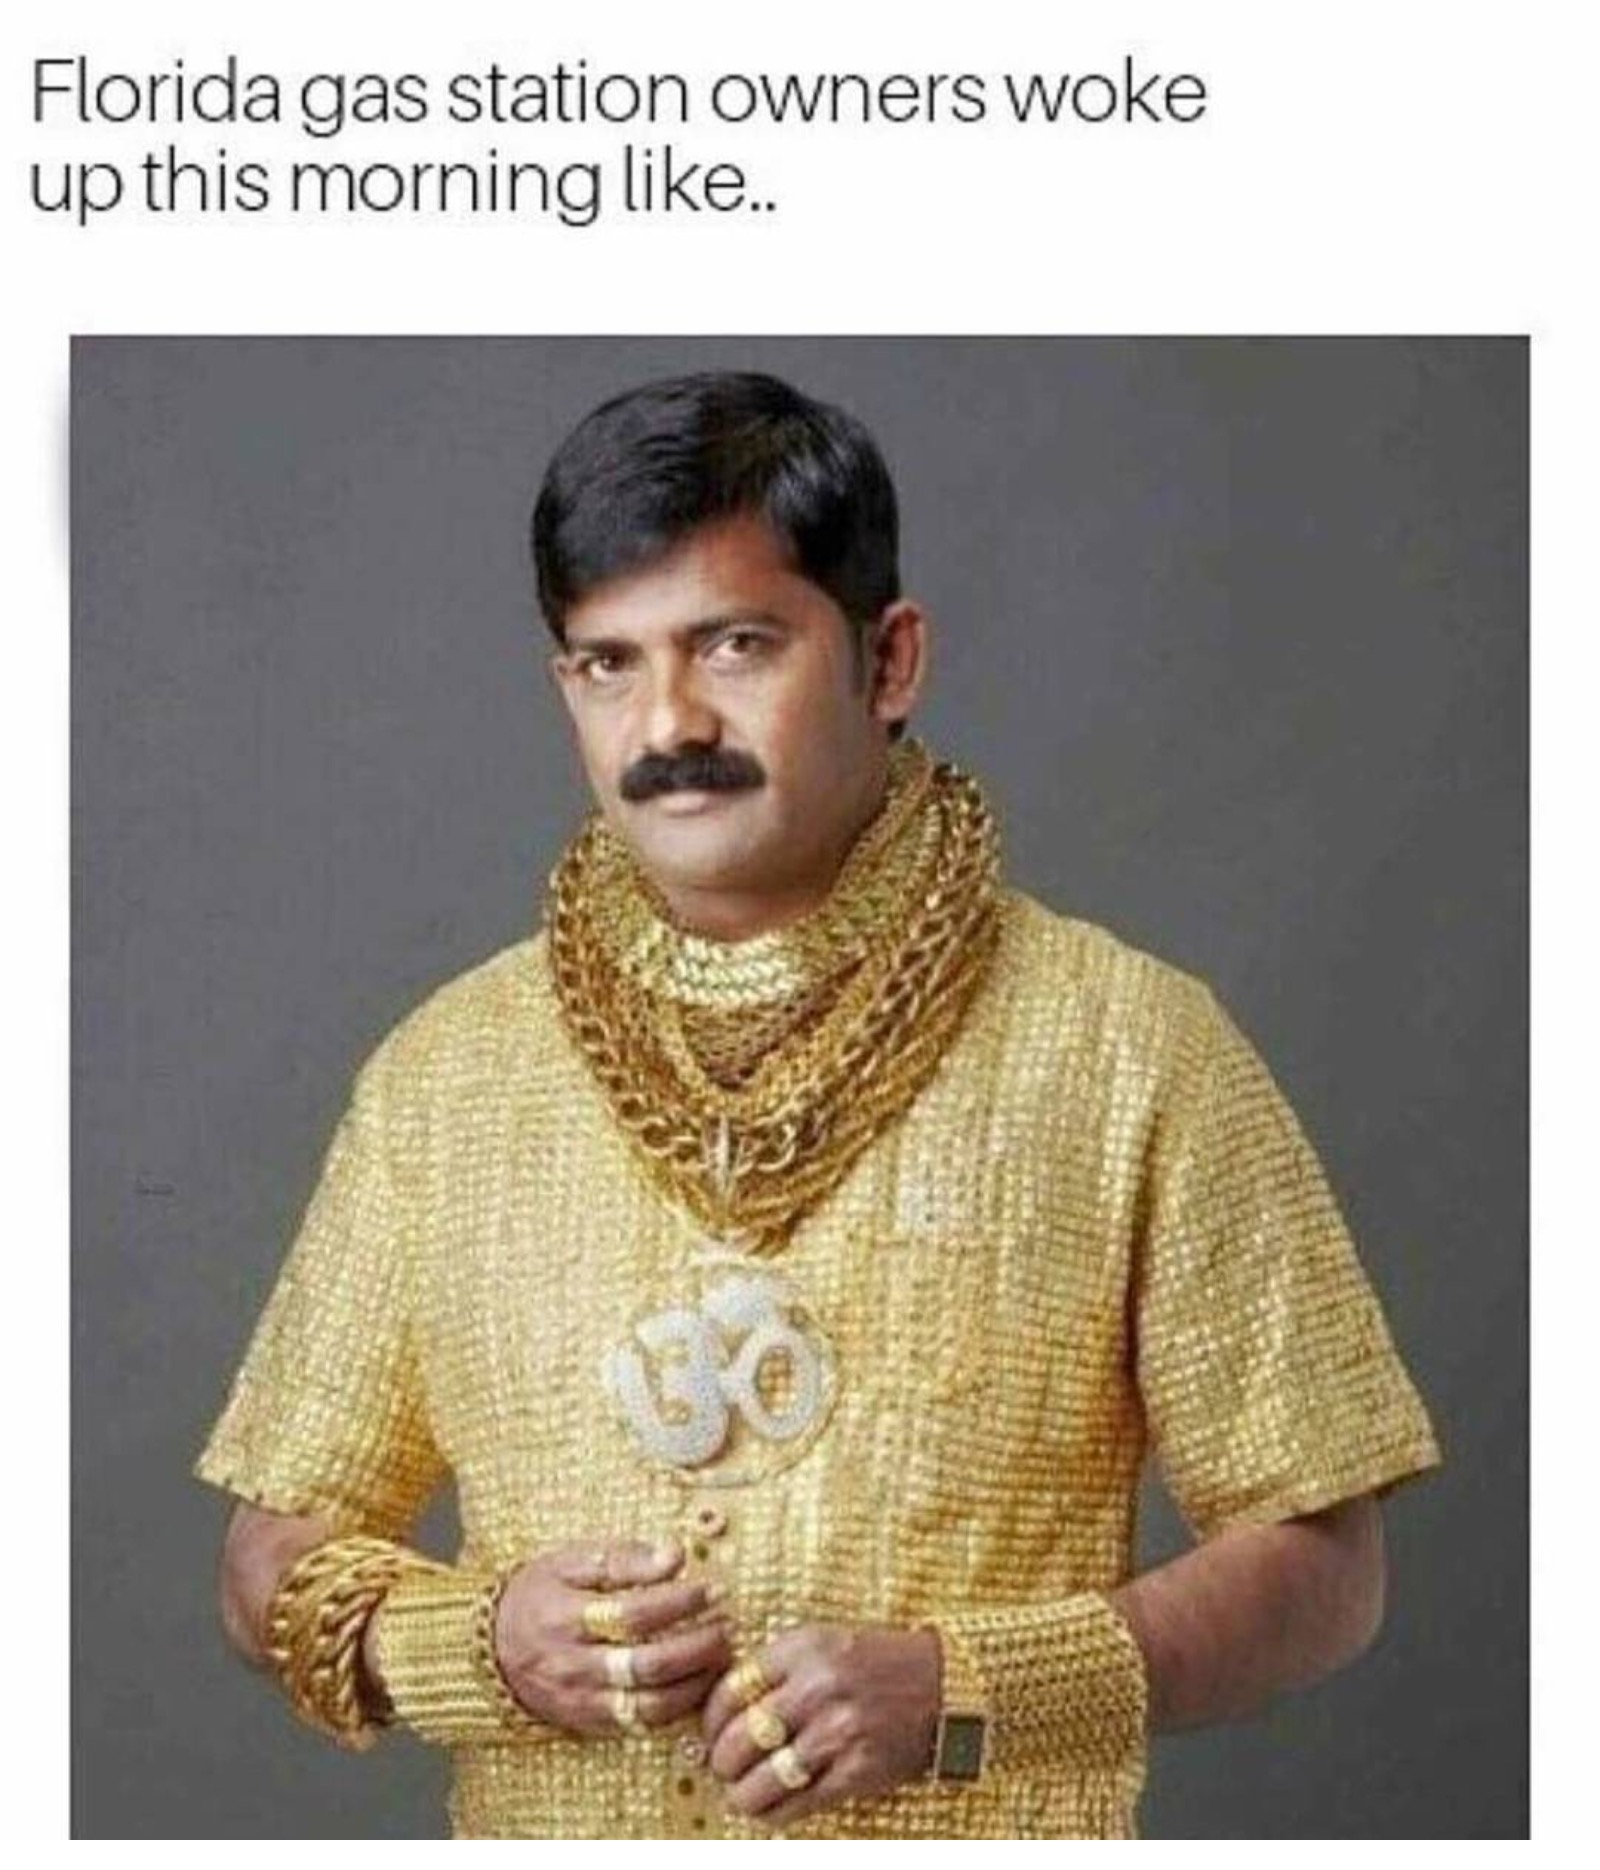 Dank meme of wealthy indian man wearing shirt made of gold as how Florida gas staion owners woke up this morning.